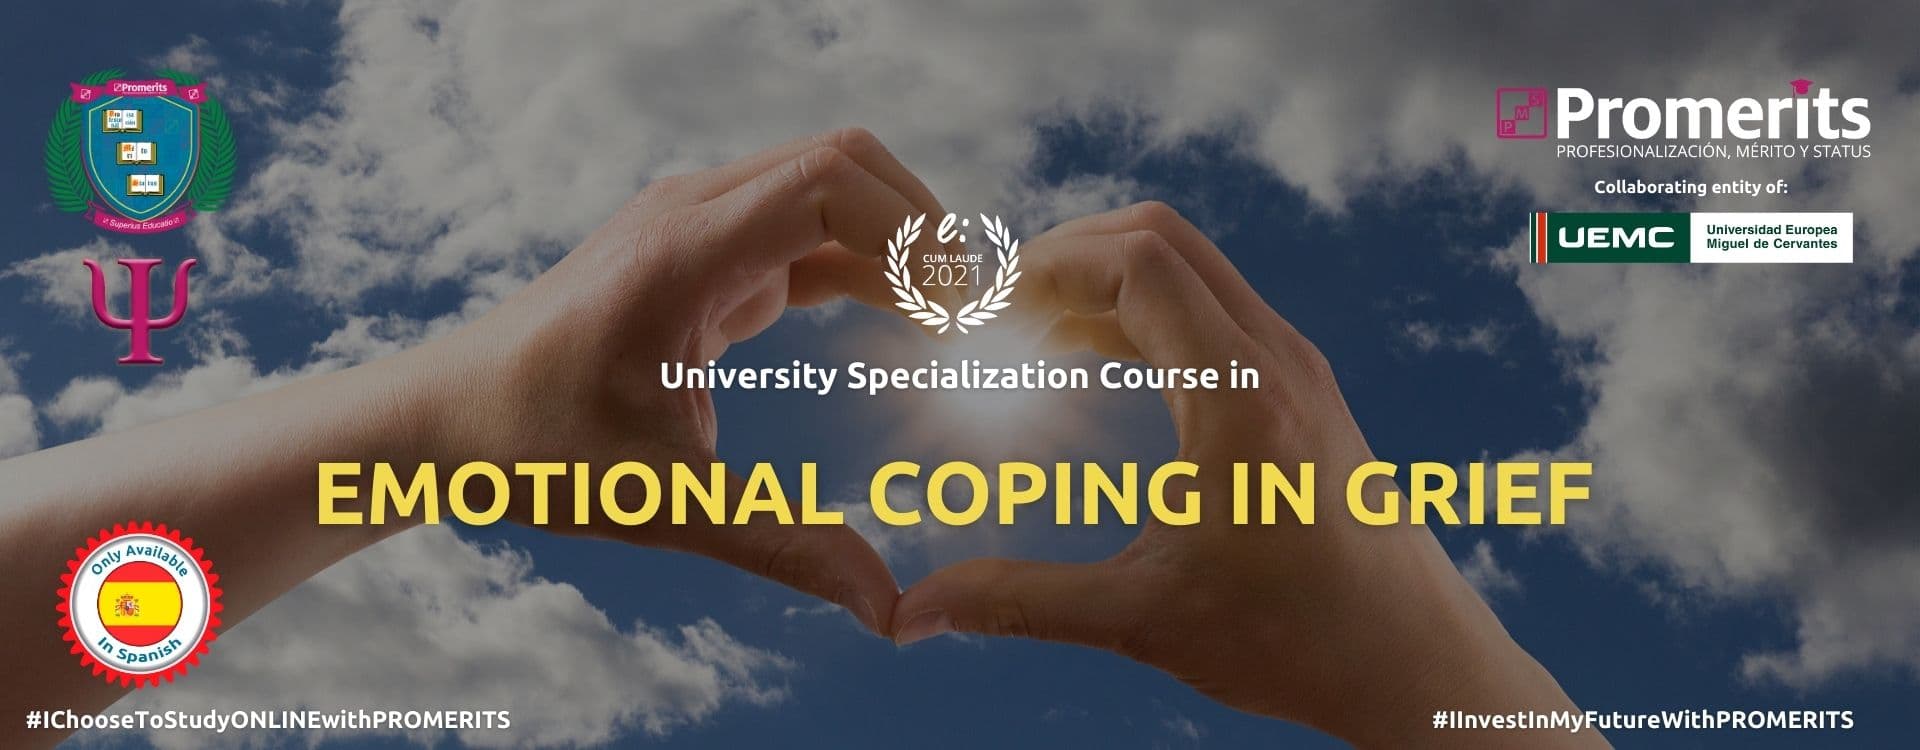 University Specialization Course in Emotional Coping in Grief